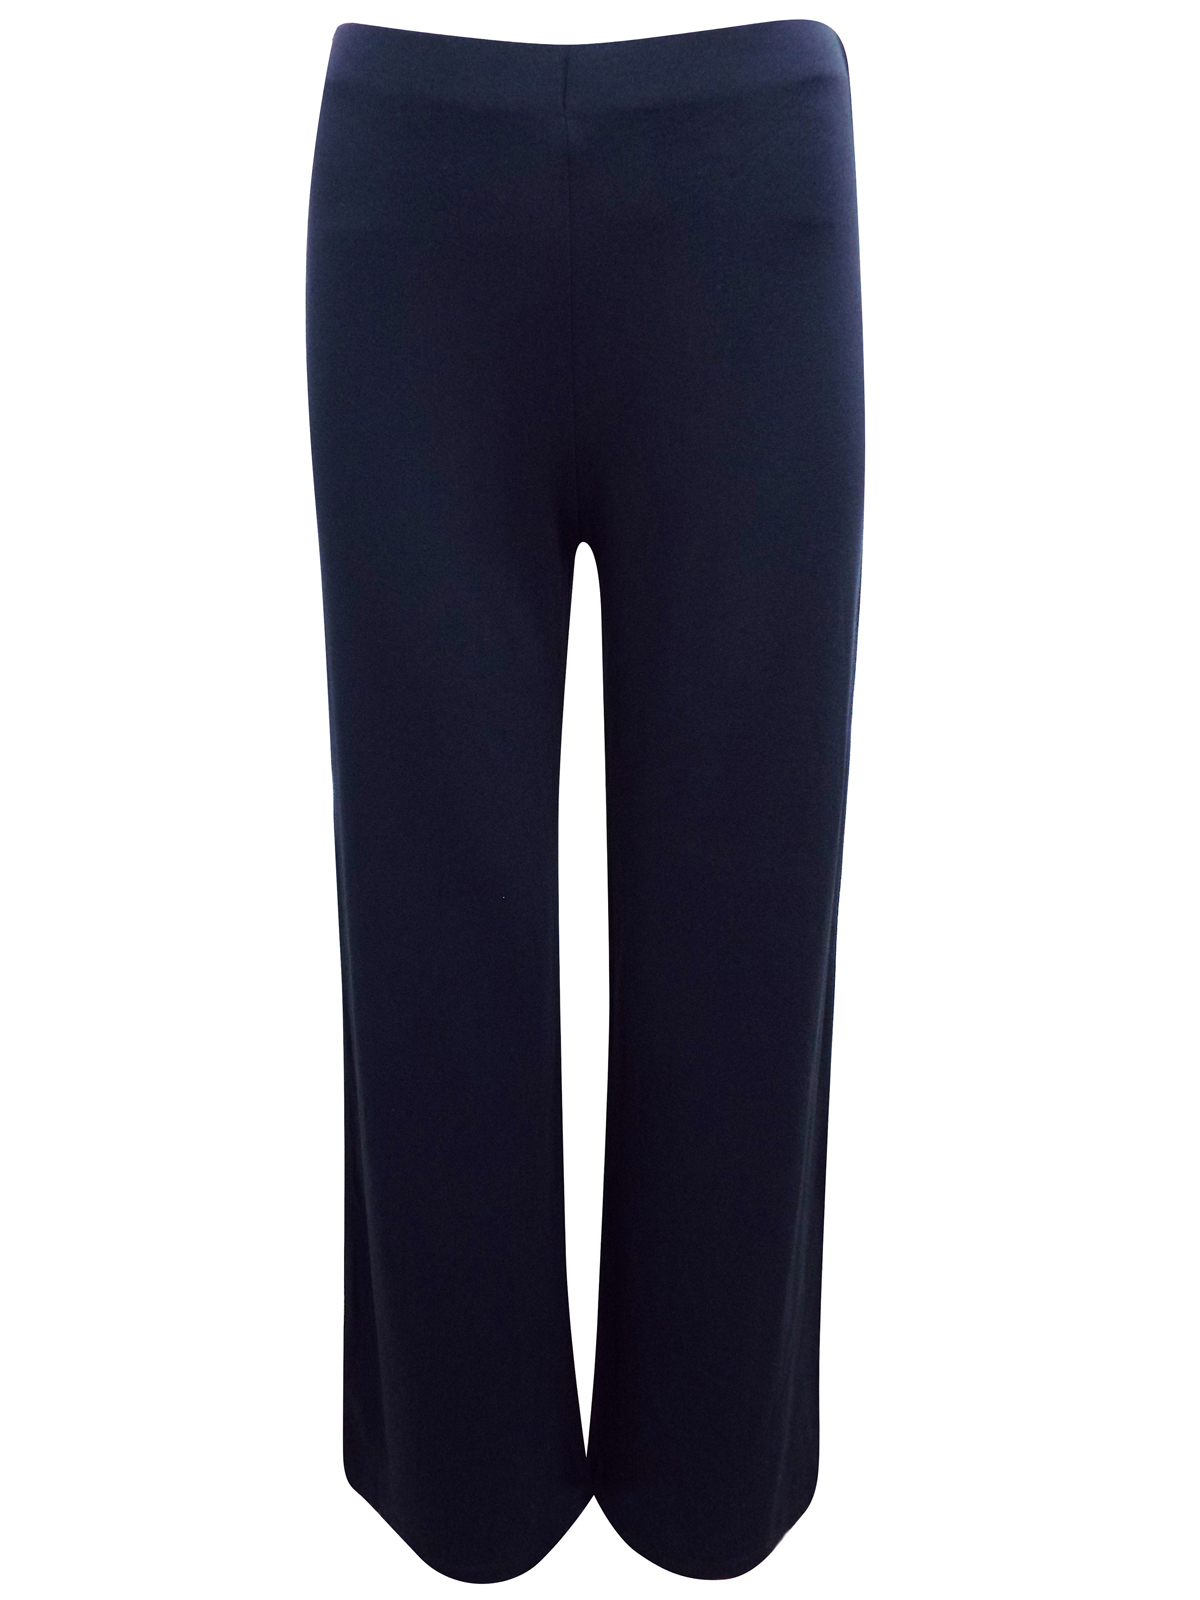 Marks and Spencer - - M&5 NAVY Wide Leg Trousers - Size 10 to 26